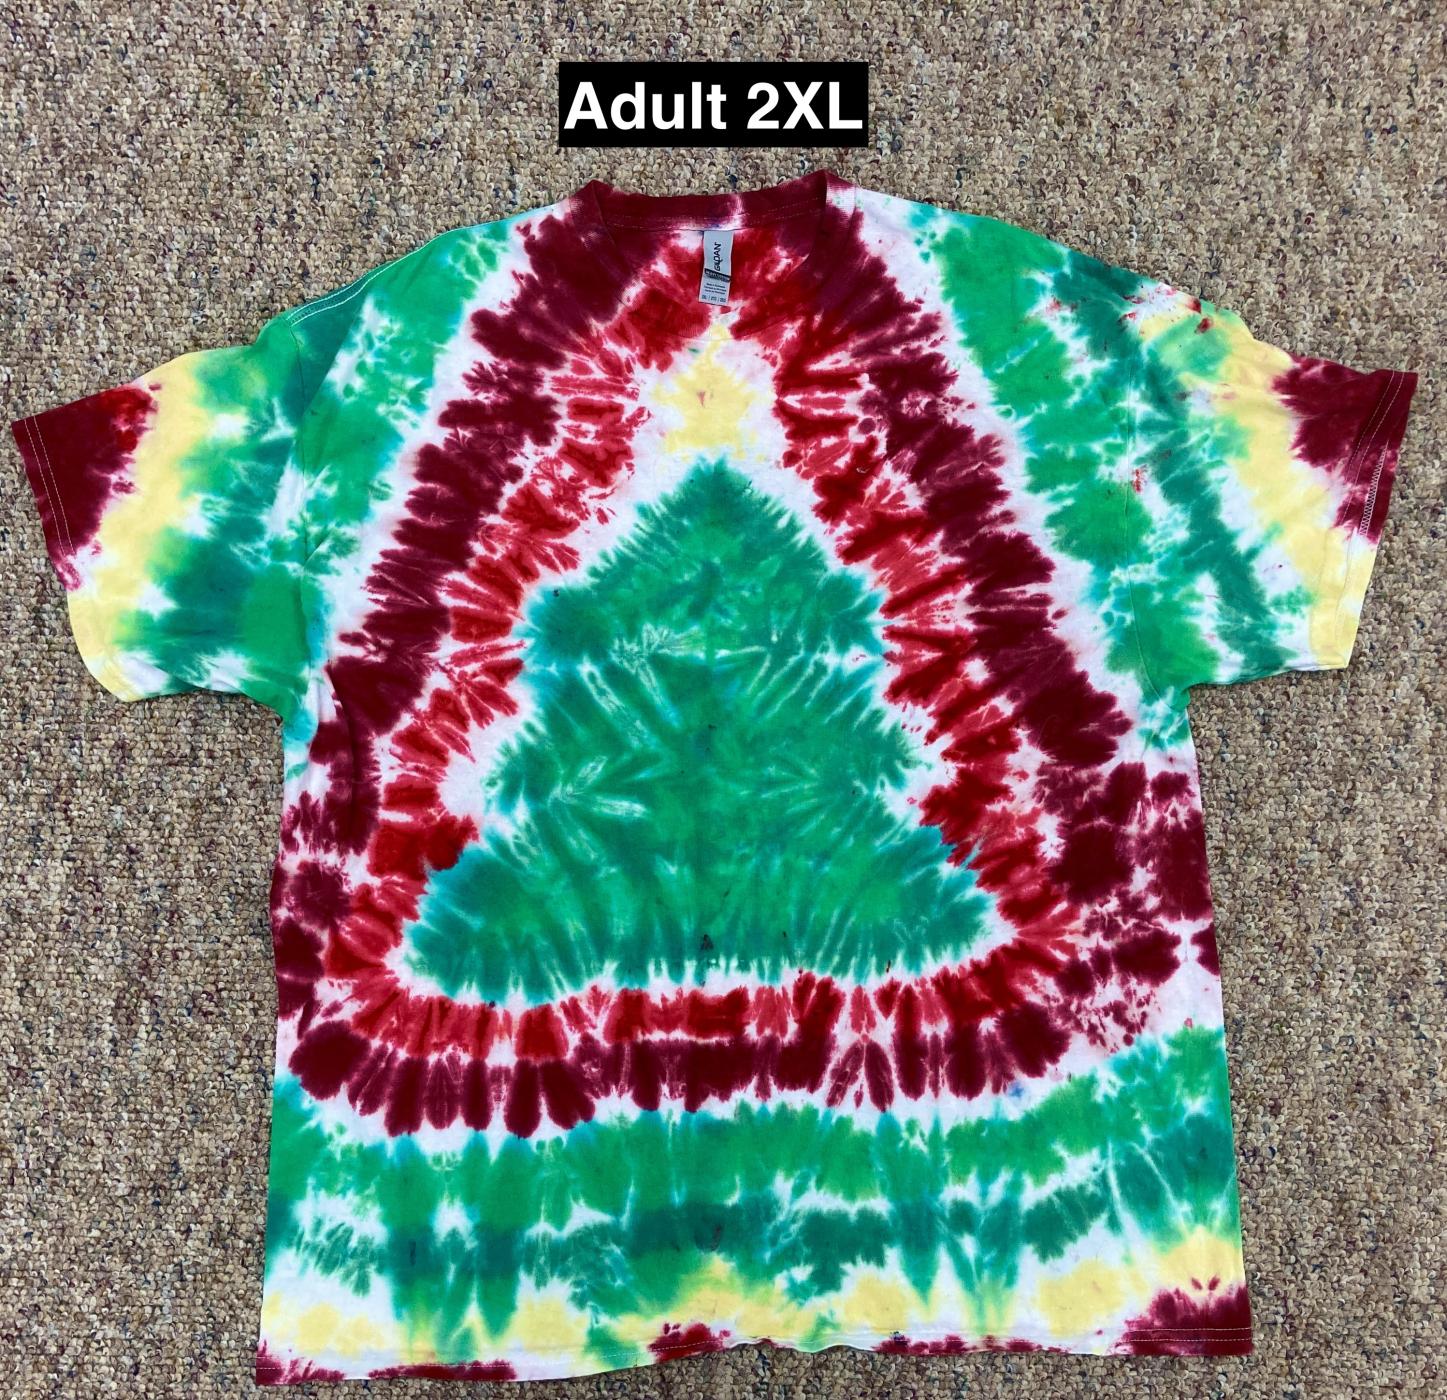 Christmas Tree with Red and Green Rings Tie Dye T Shirt Adult 2XL